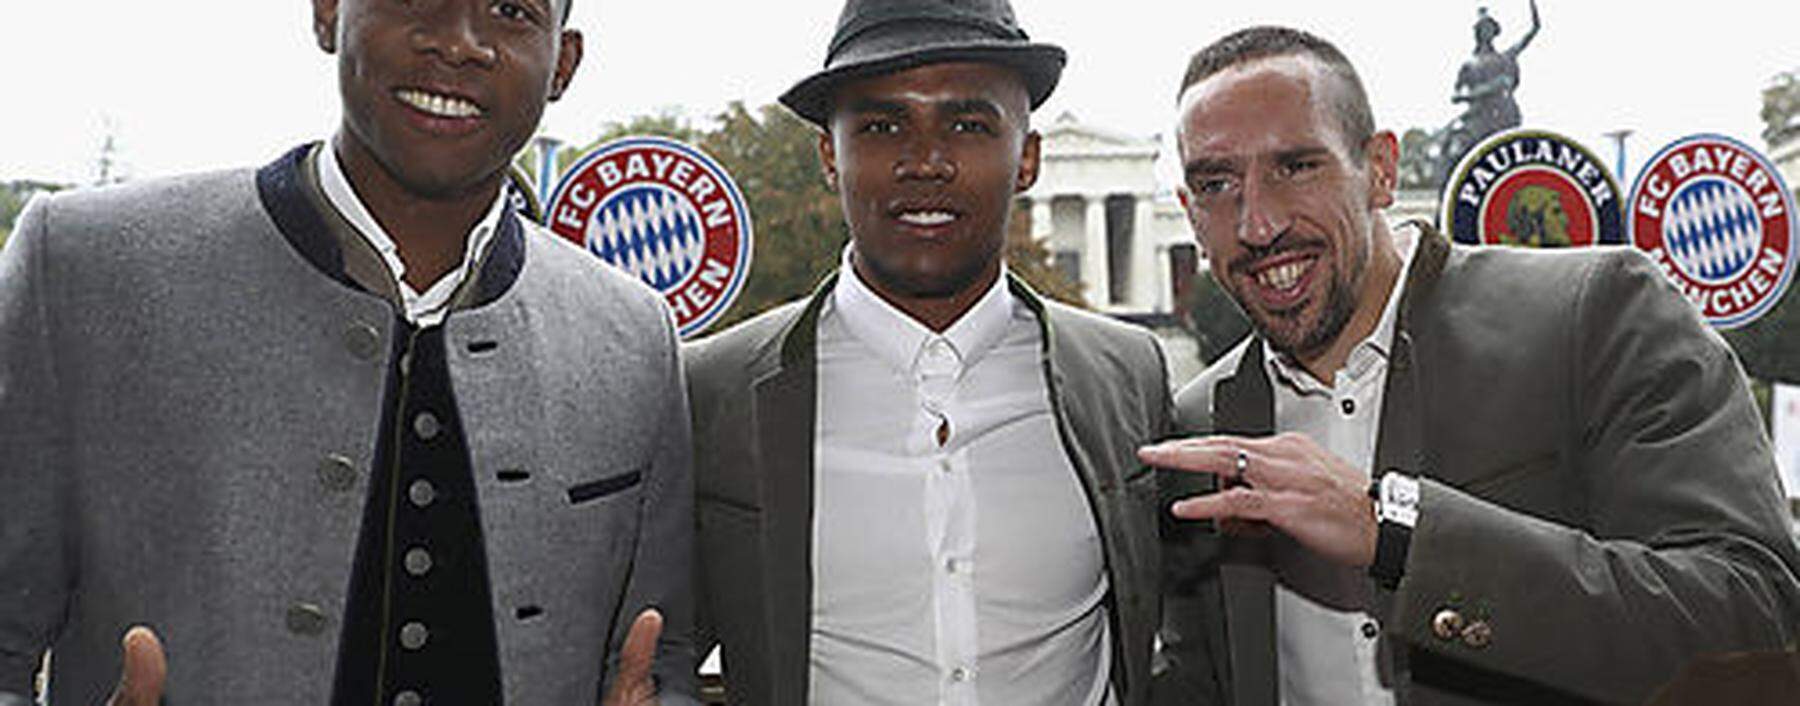 Alaba, Costa, and Ribery of FC Bayern Munich pose during their visit at the Oktoberfest in Munich